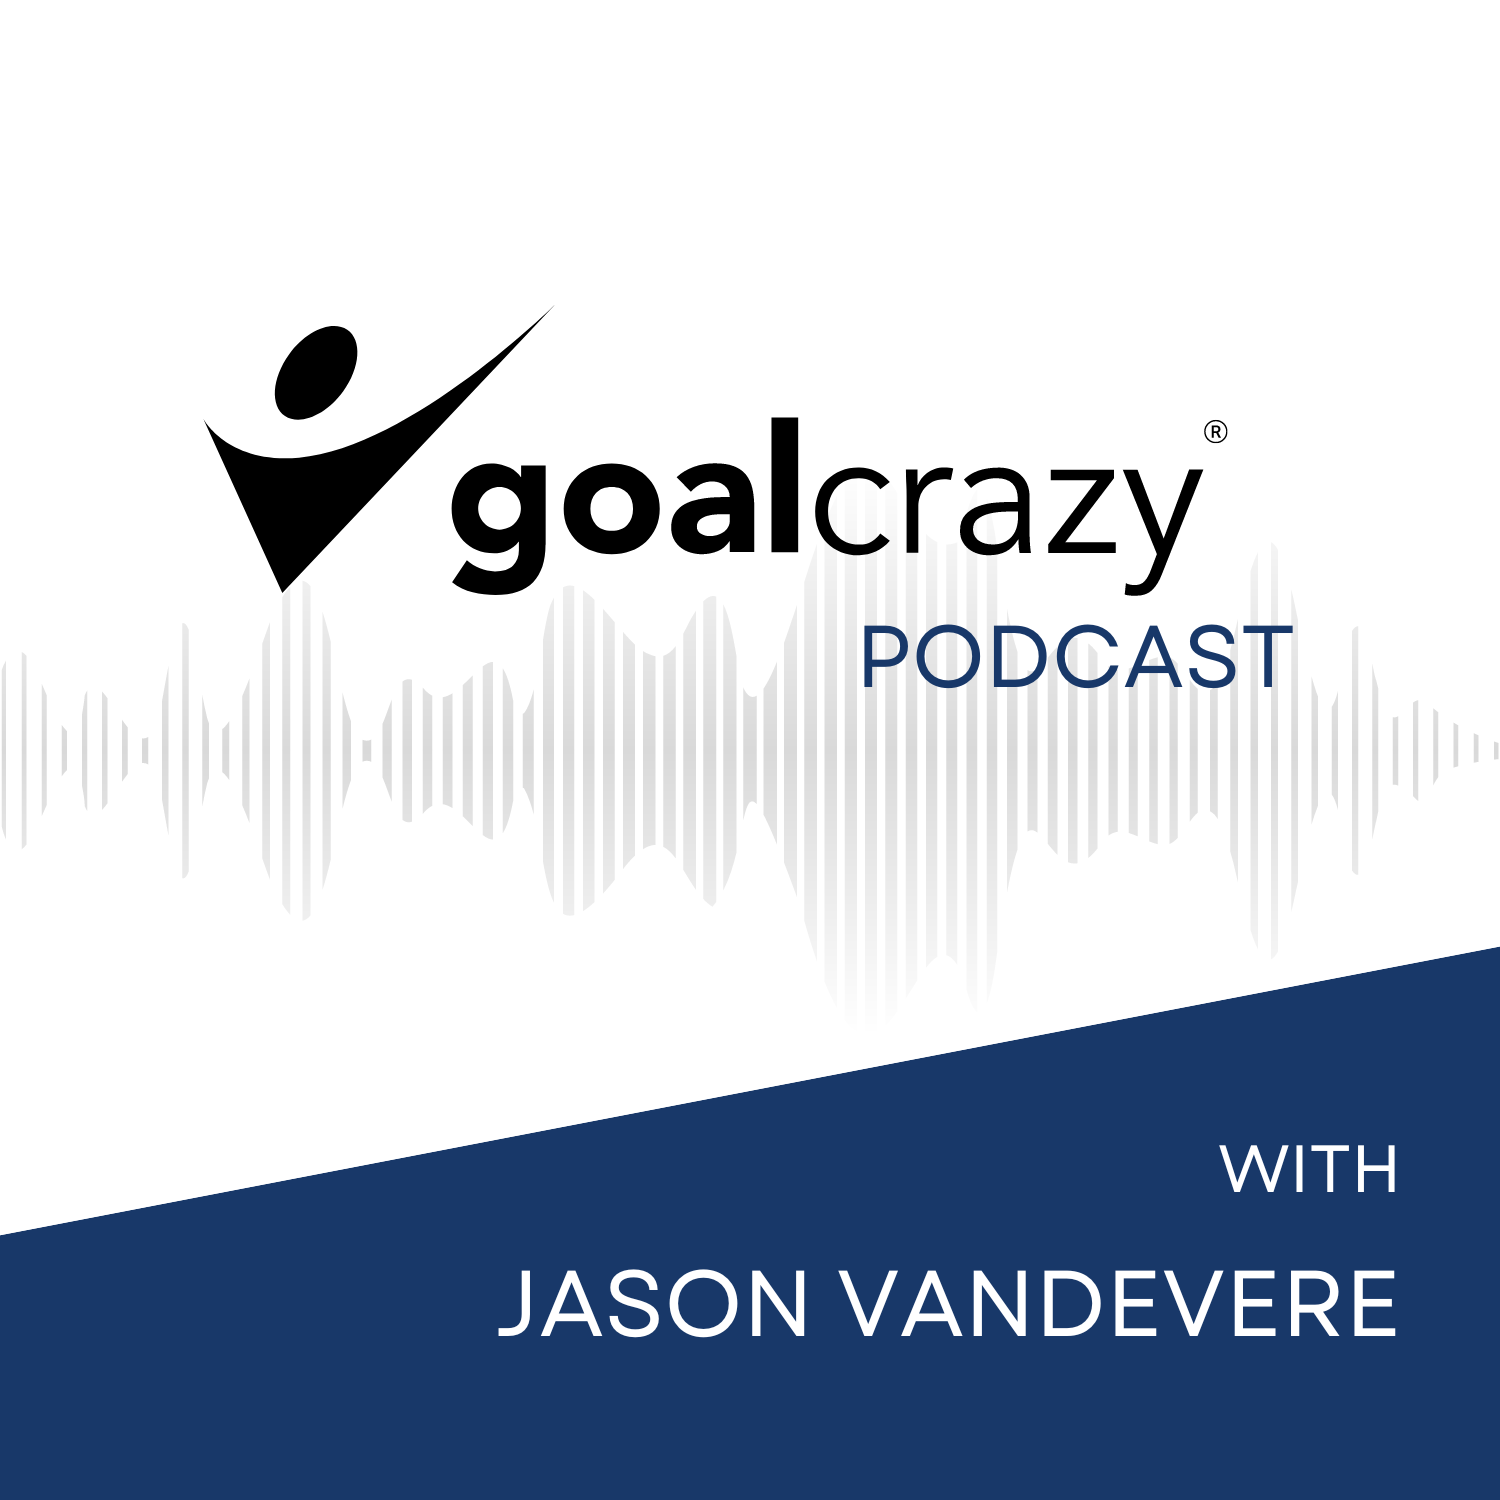 Episode Title: 019: Goals Really Can Change Your Life ft. Conall O’Brien